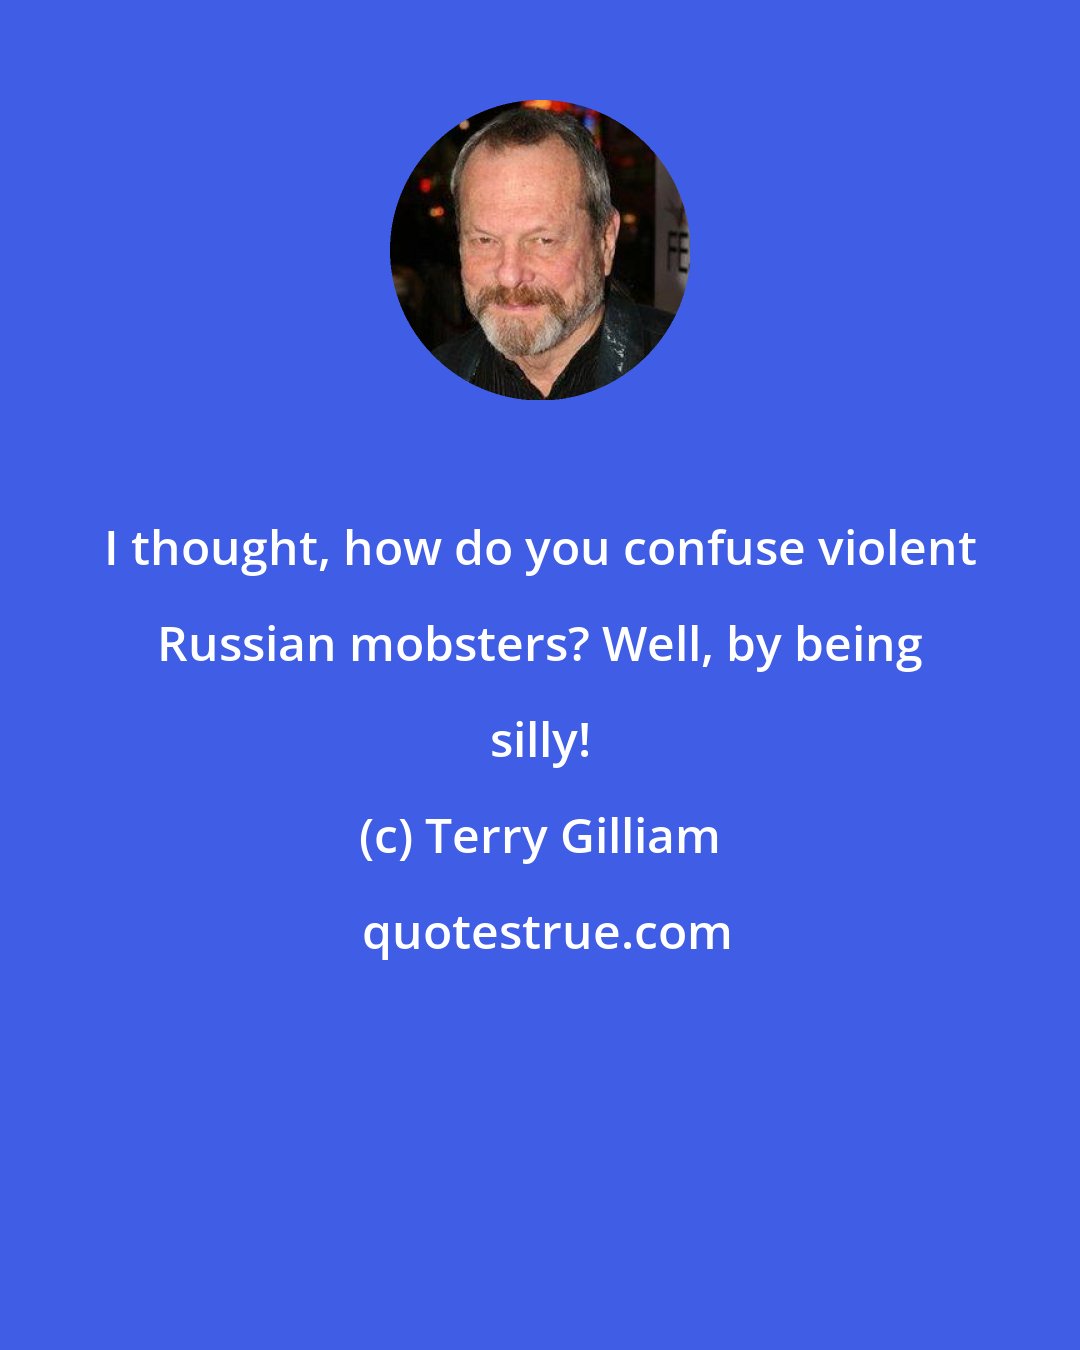 Terry Gilliam: I thought, how do you confuse violent Russian mobsters? Well, by being silly!